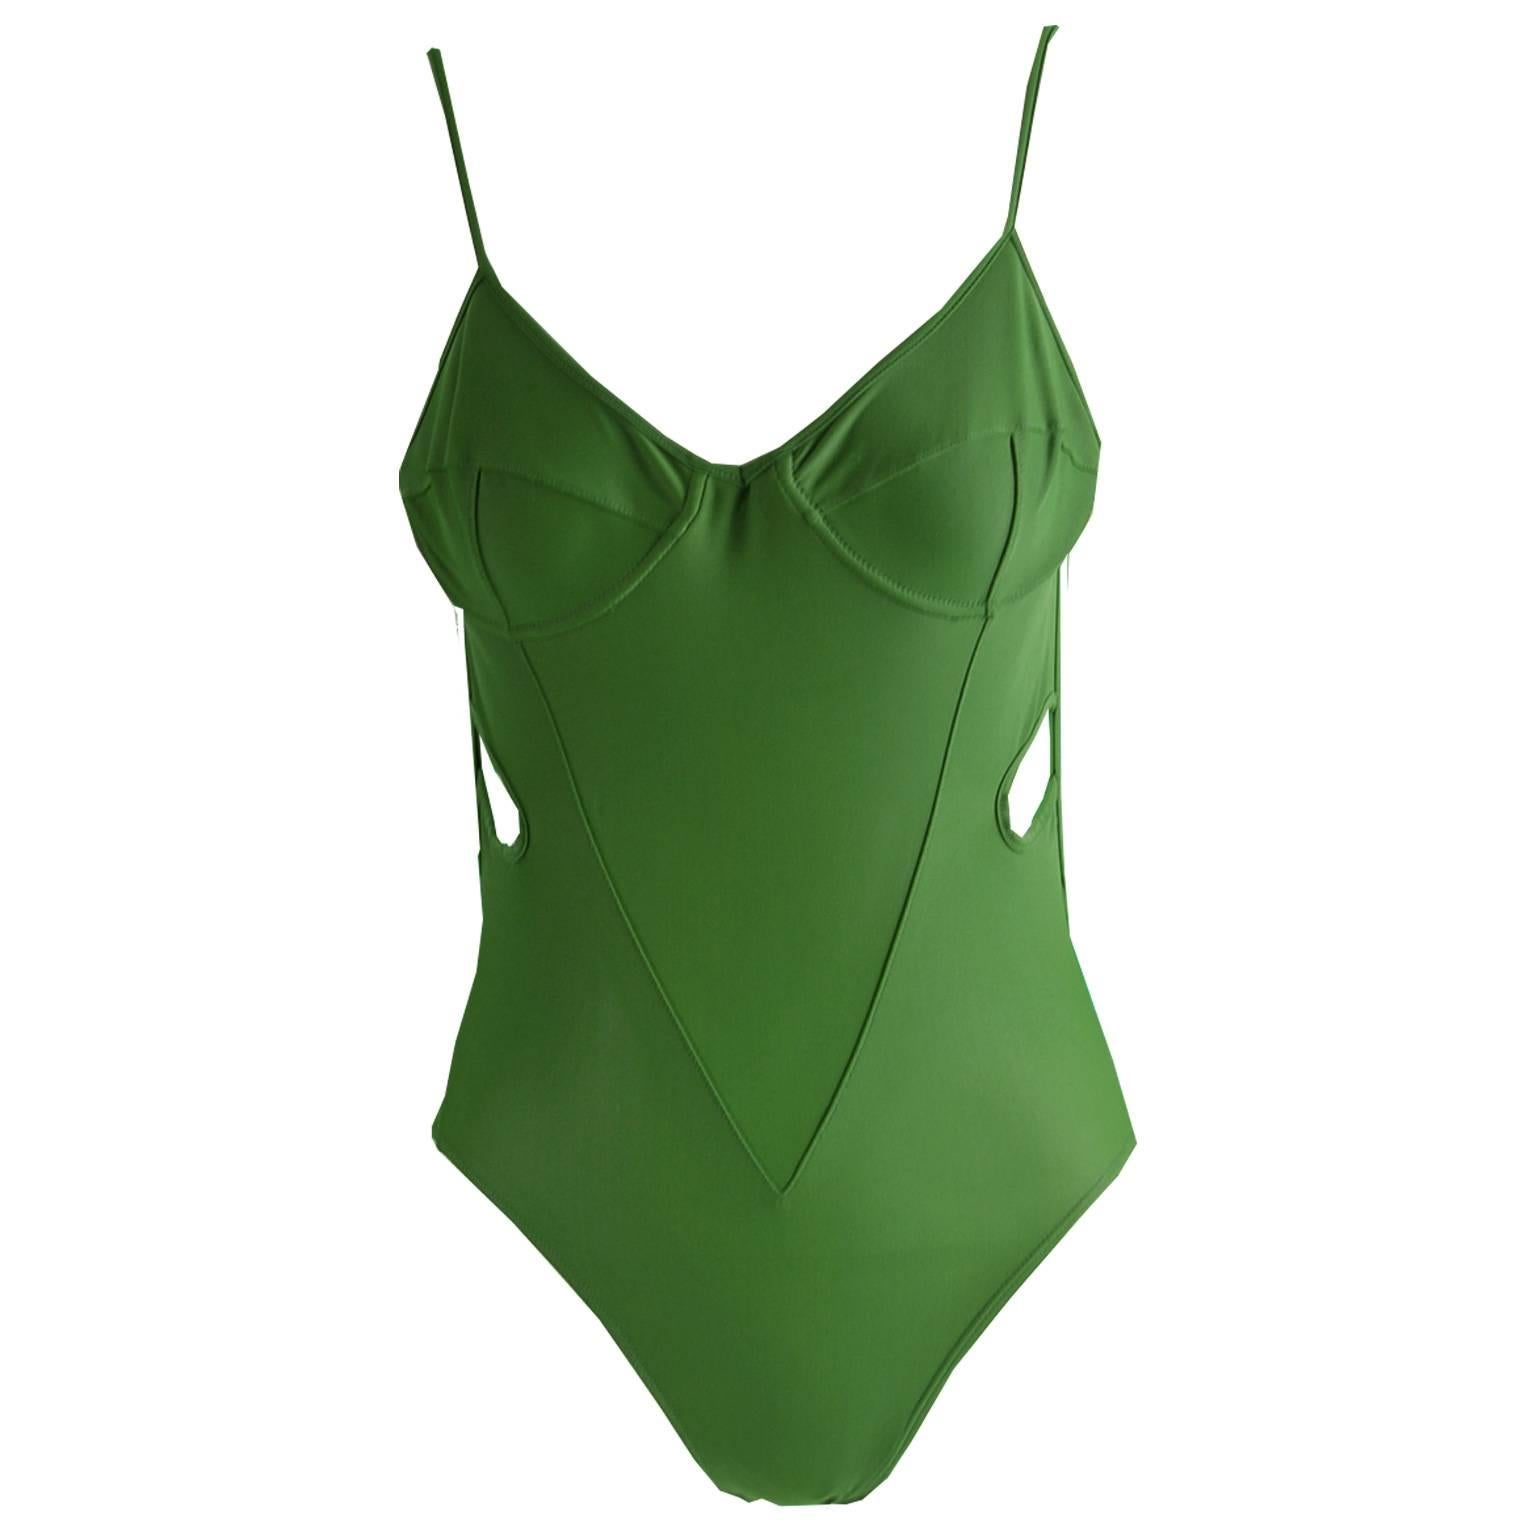 Early John Galliano London Green Cut Out Swimsuit Made in Britain, 1980s